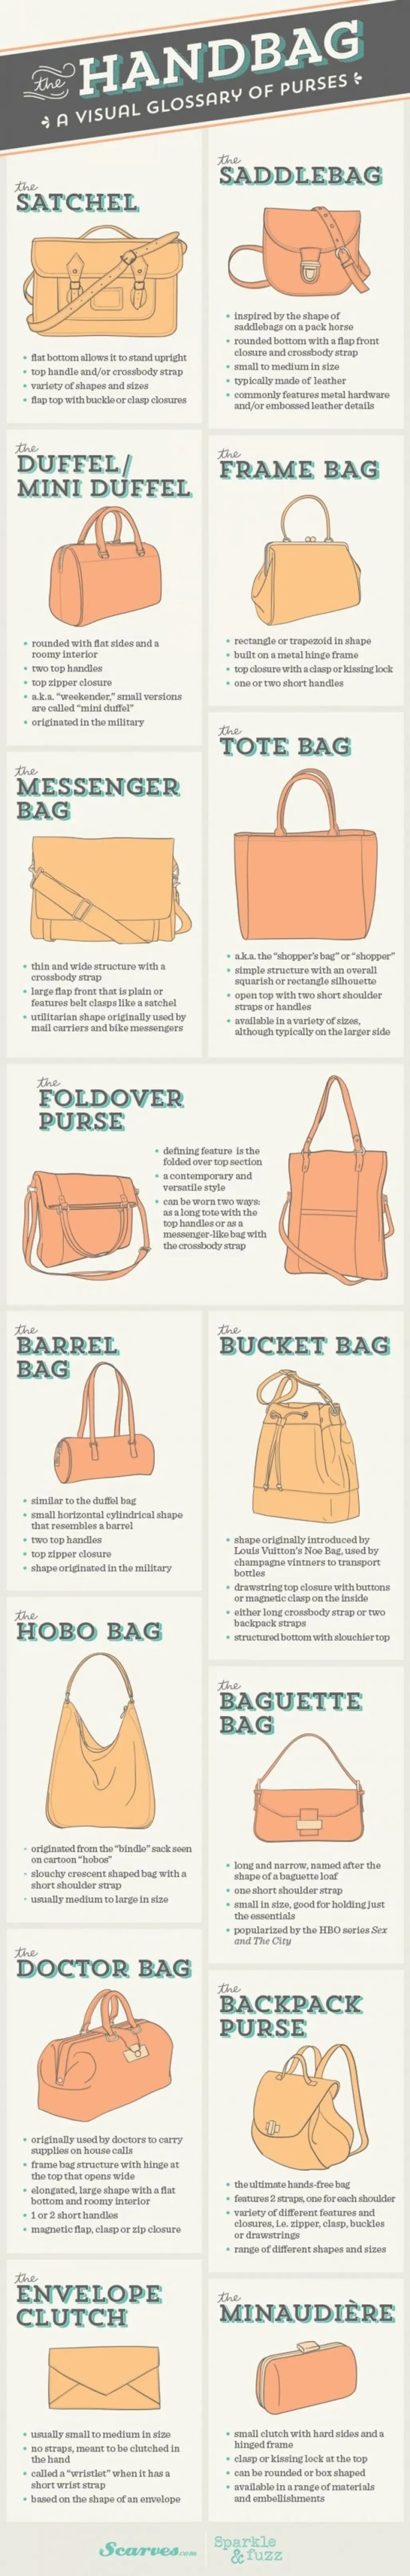 Your Guide to Handbags